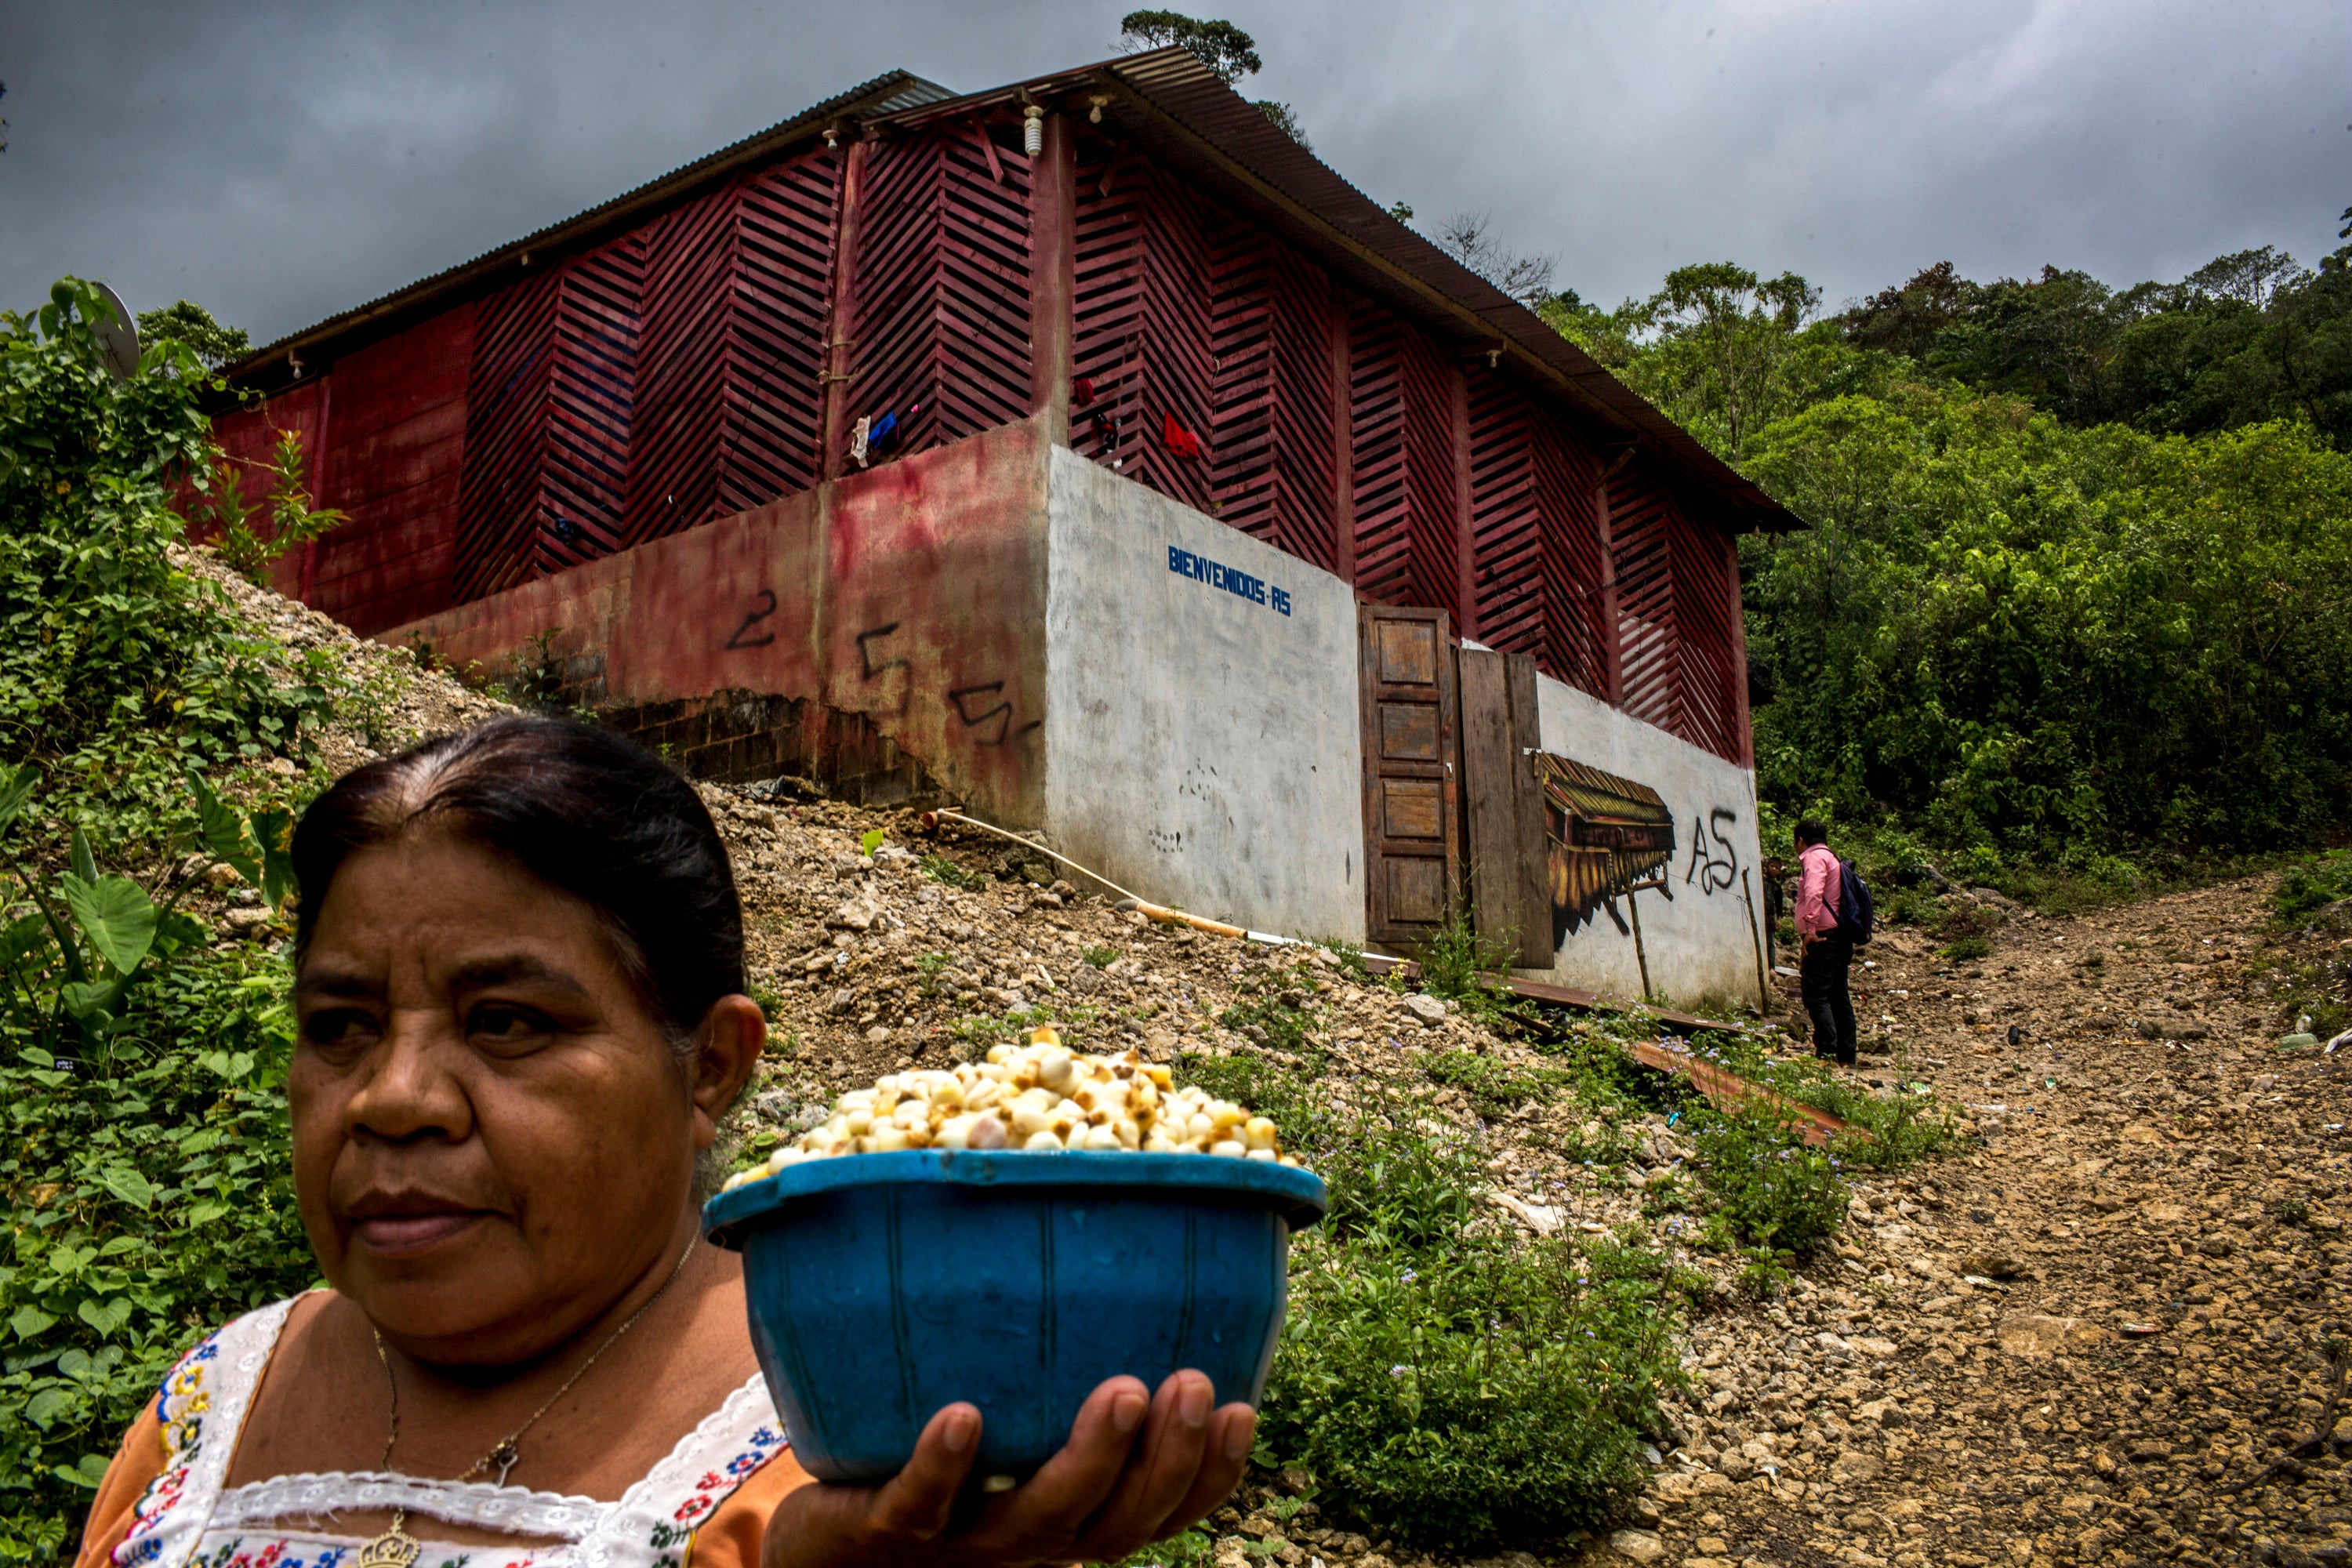 The house of a separated family in the Guatemalan village of Sequixpec